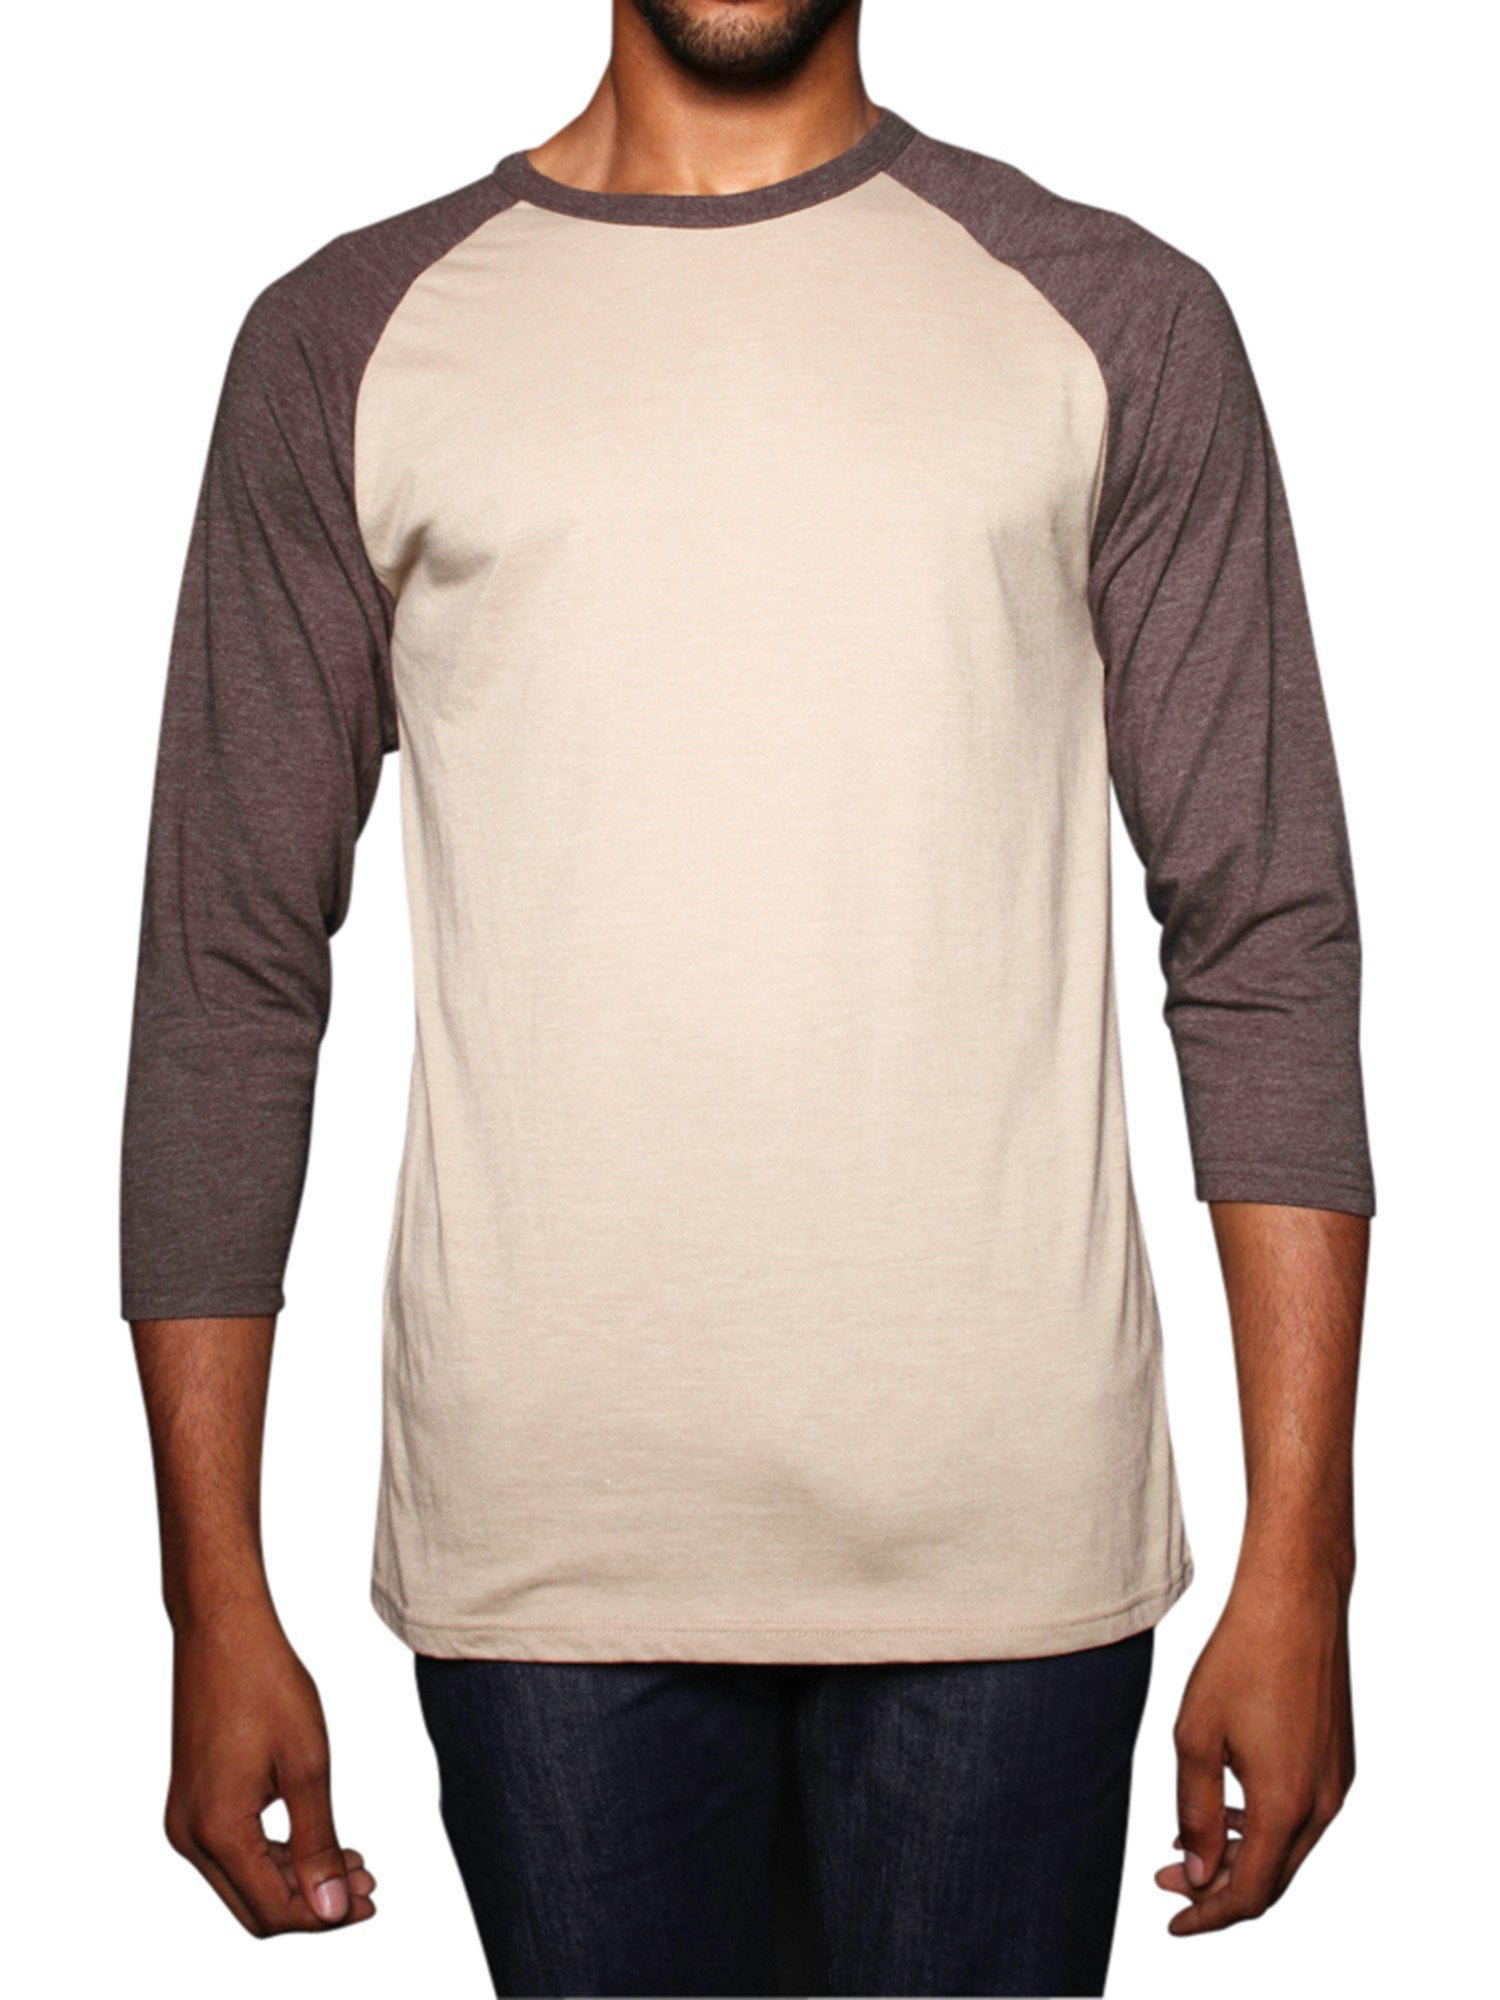 Men 3/4 Sleeve T-Shirts Tee 80% Cotton,20% Polyester Classic Premium Quality